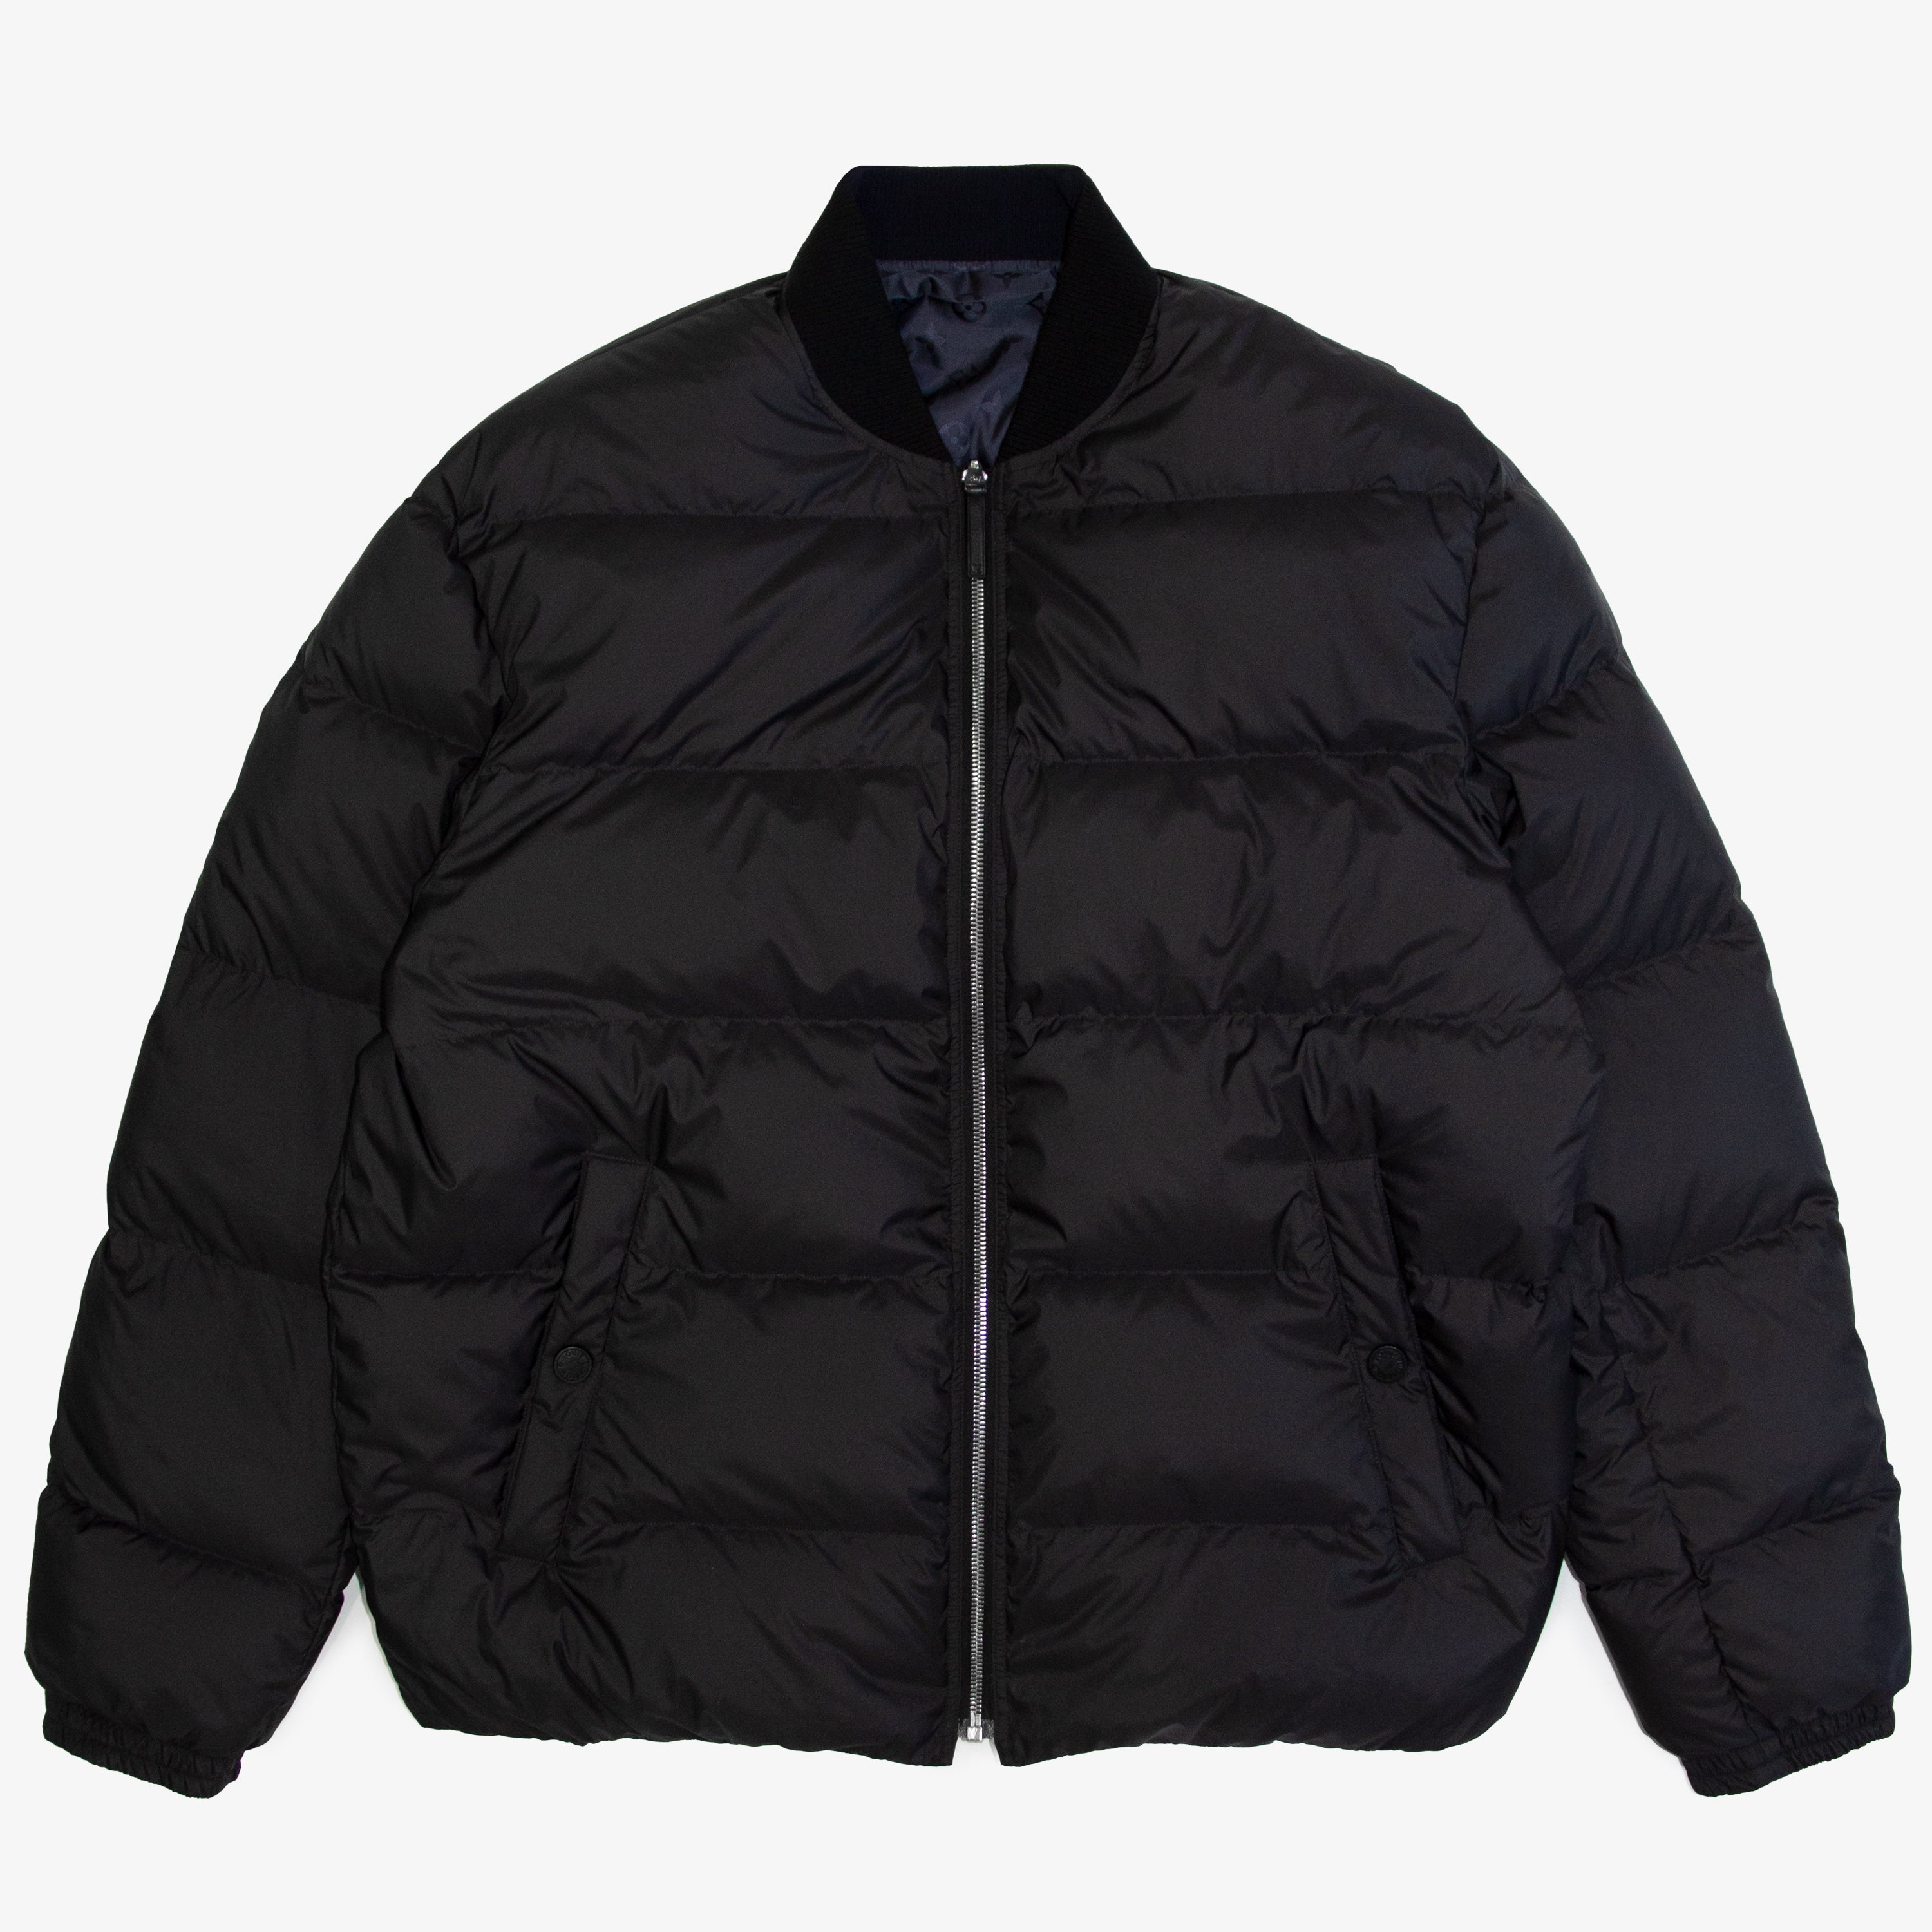 Louis Vuitton Mens Jackets, Black, 54 (Stock Confirmation Required)